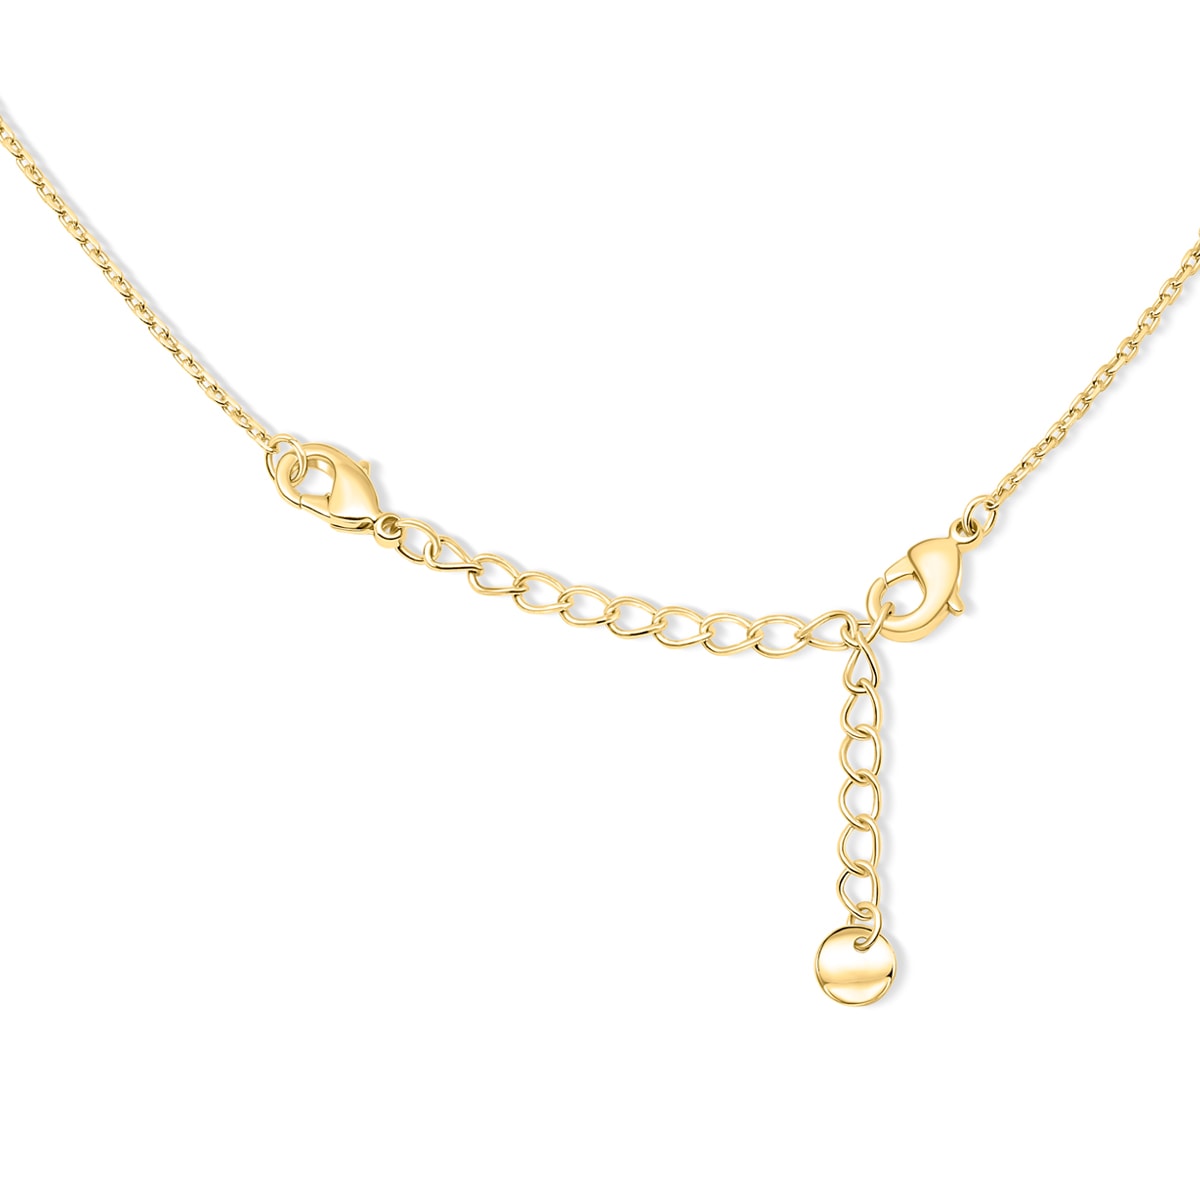 Affordable gold chain necklace